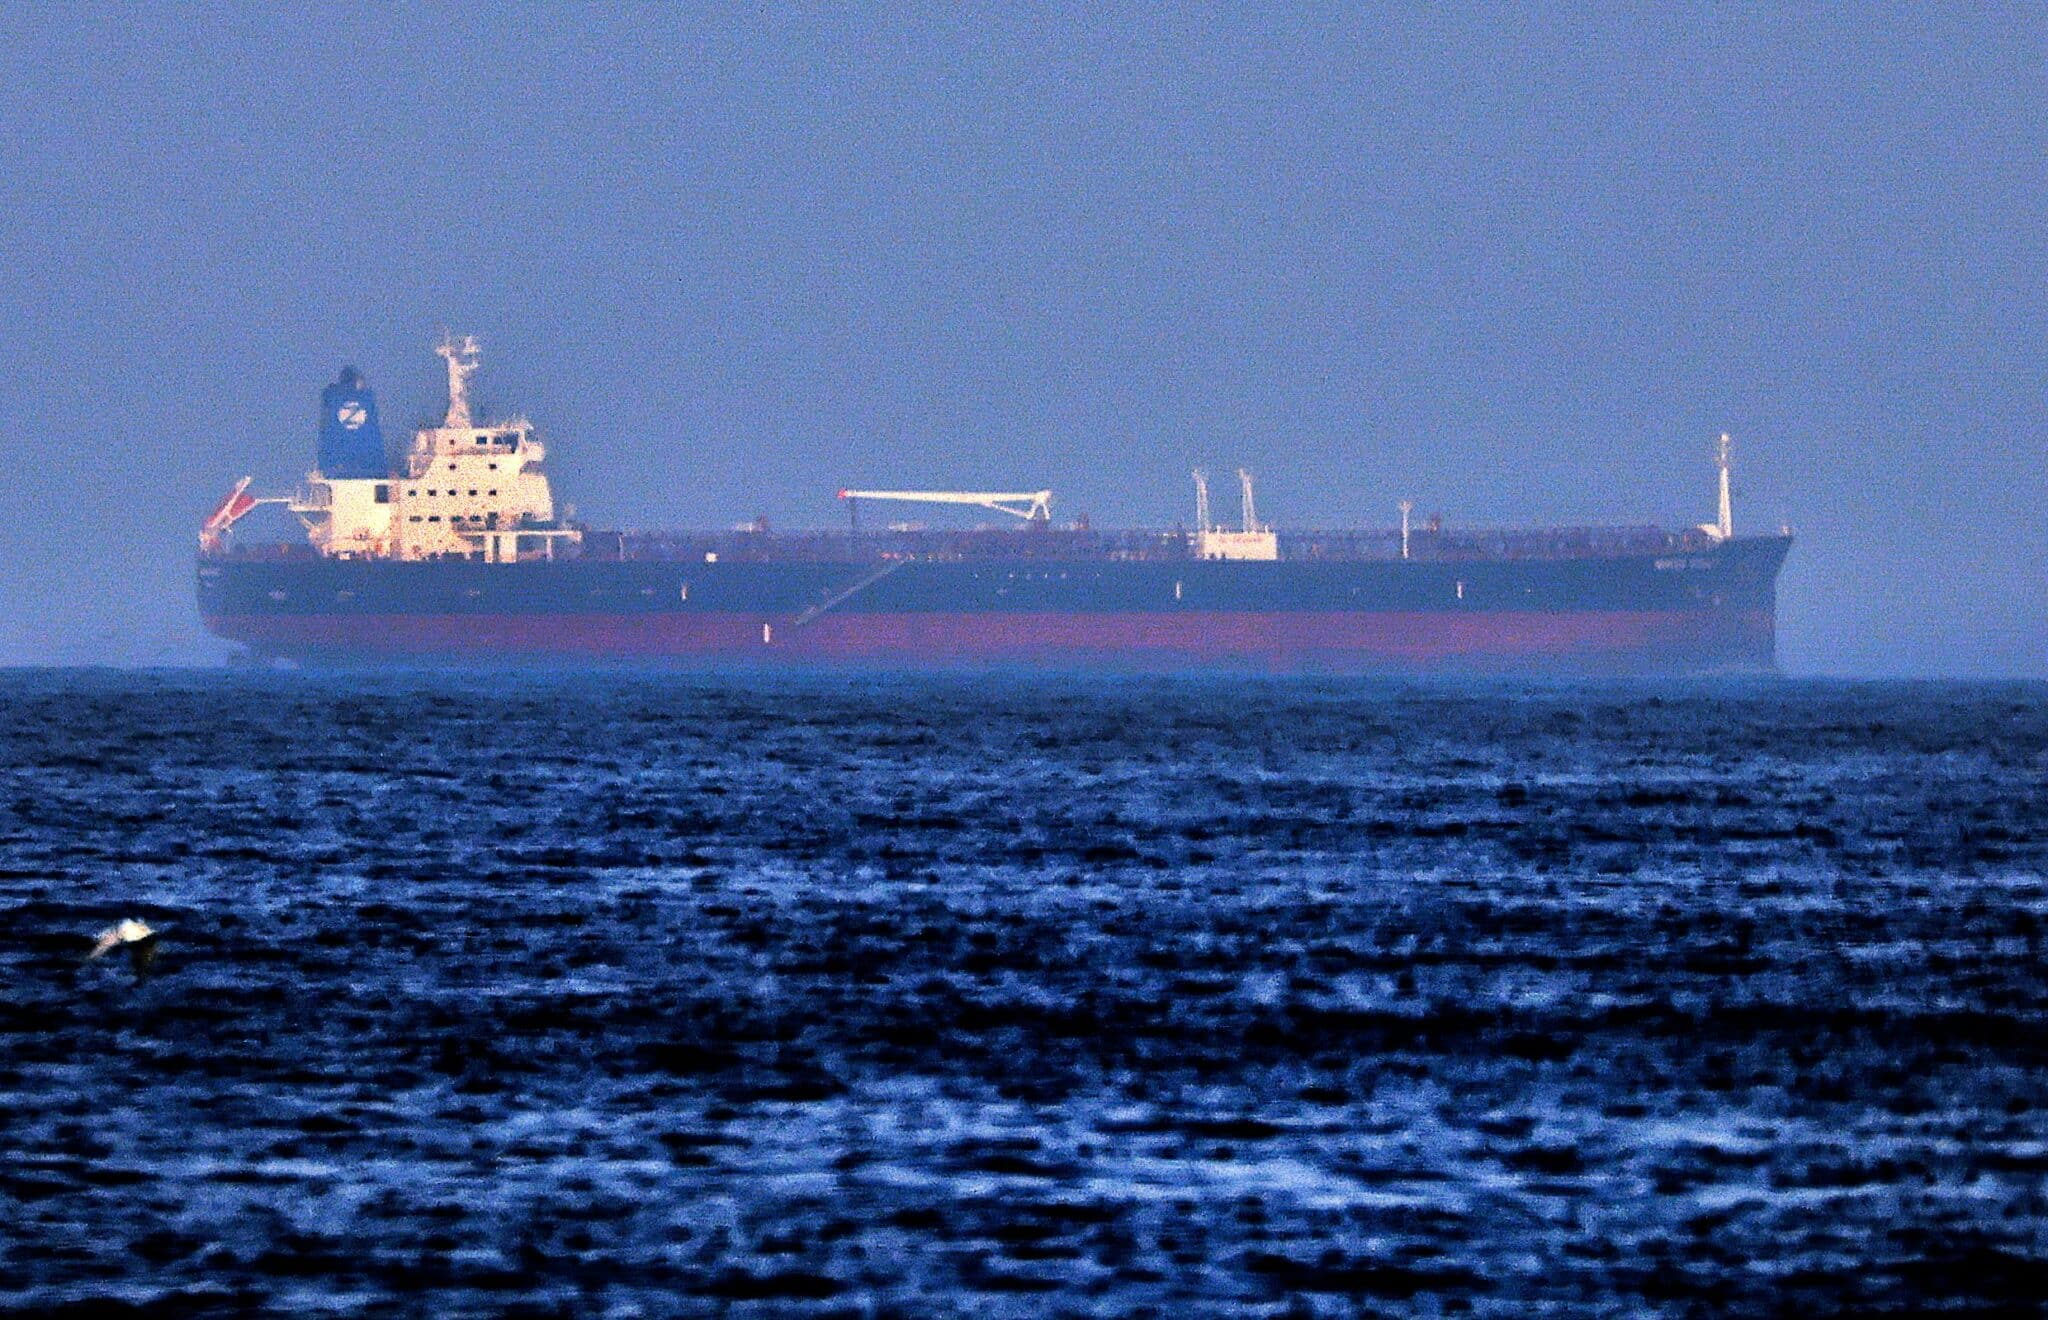 A picture taken on  August 3, 2021 shows the Israeli-linked Japanese-owned tanker MT Mercer Street, off the port of the Gulf Emirate of Fujairah in the United Arab Emirates. - On July 29, two crew members of the tanker MT Mercer Street, managed by a prominent Israeli businessman's company, were killed in what appears to be a drone attack off Oman, the vessel's London-based operator and the US military say, with Israel blaming Iran. (Photo by Karim SAHIB / AFP) (Photo by KARIM SAHIB/AFP via Getty Images)